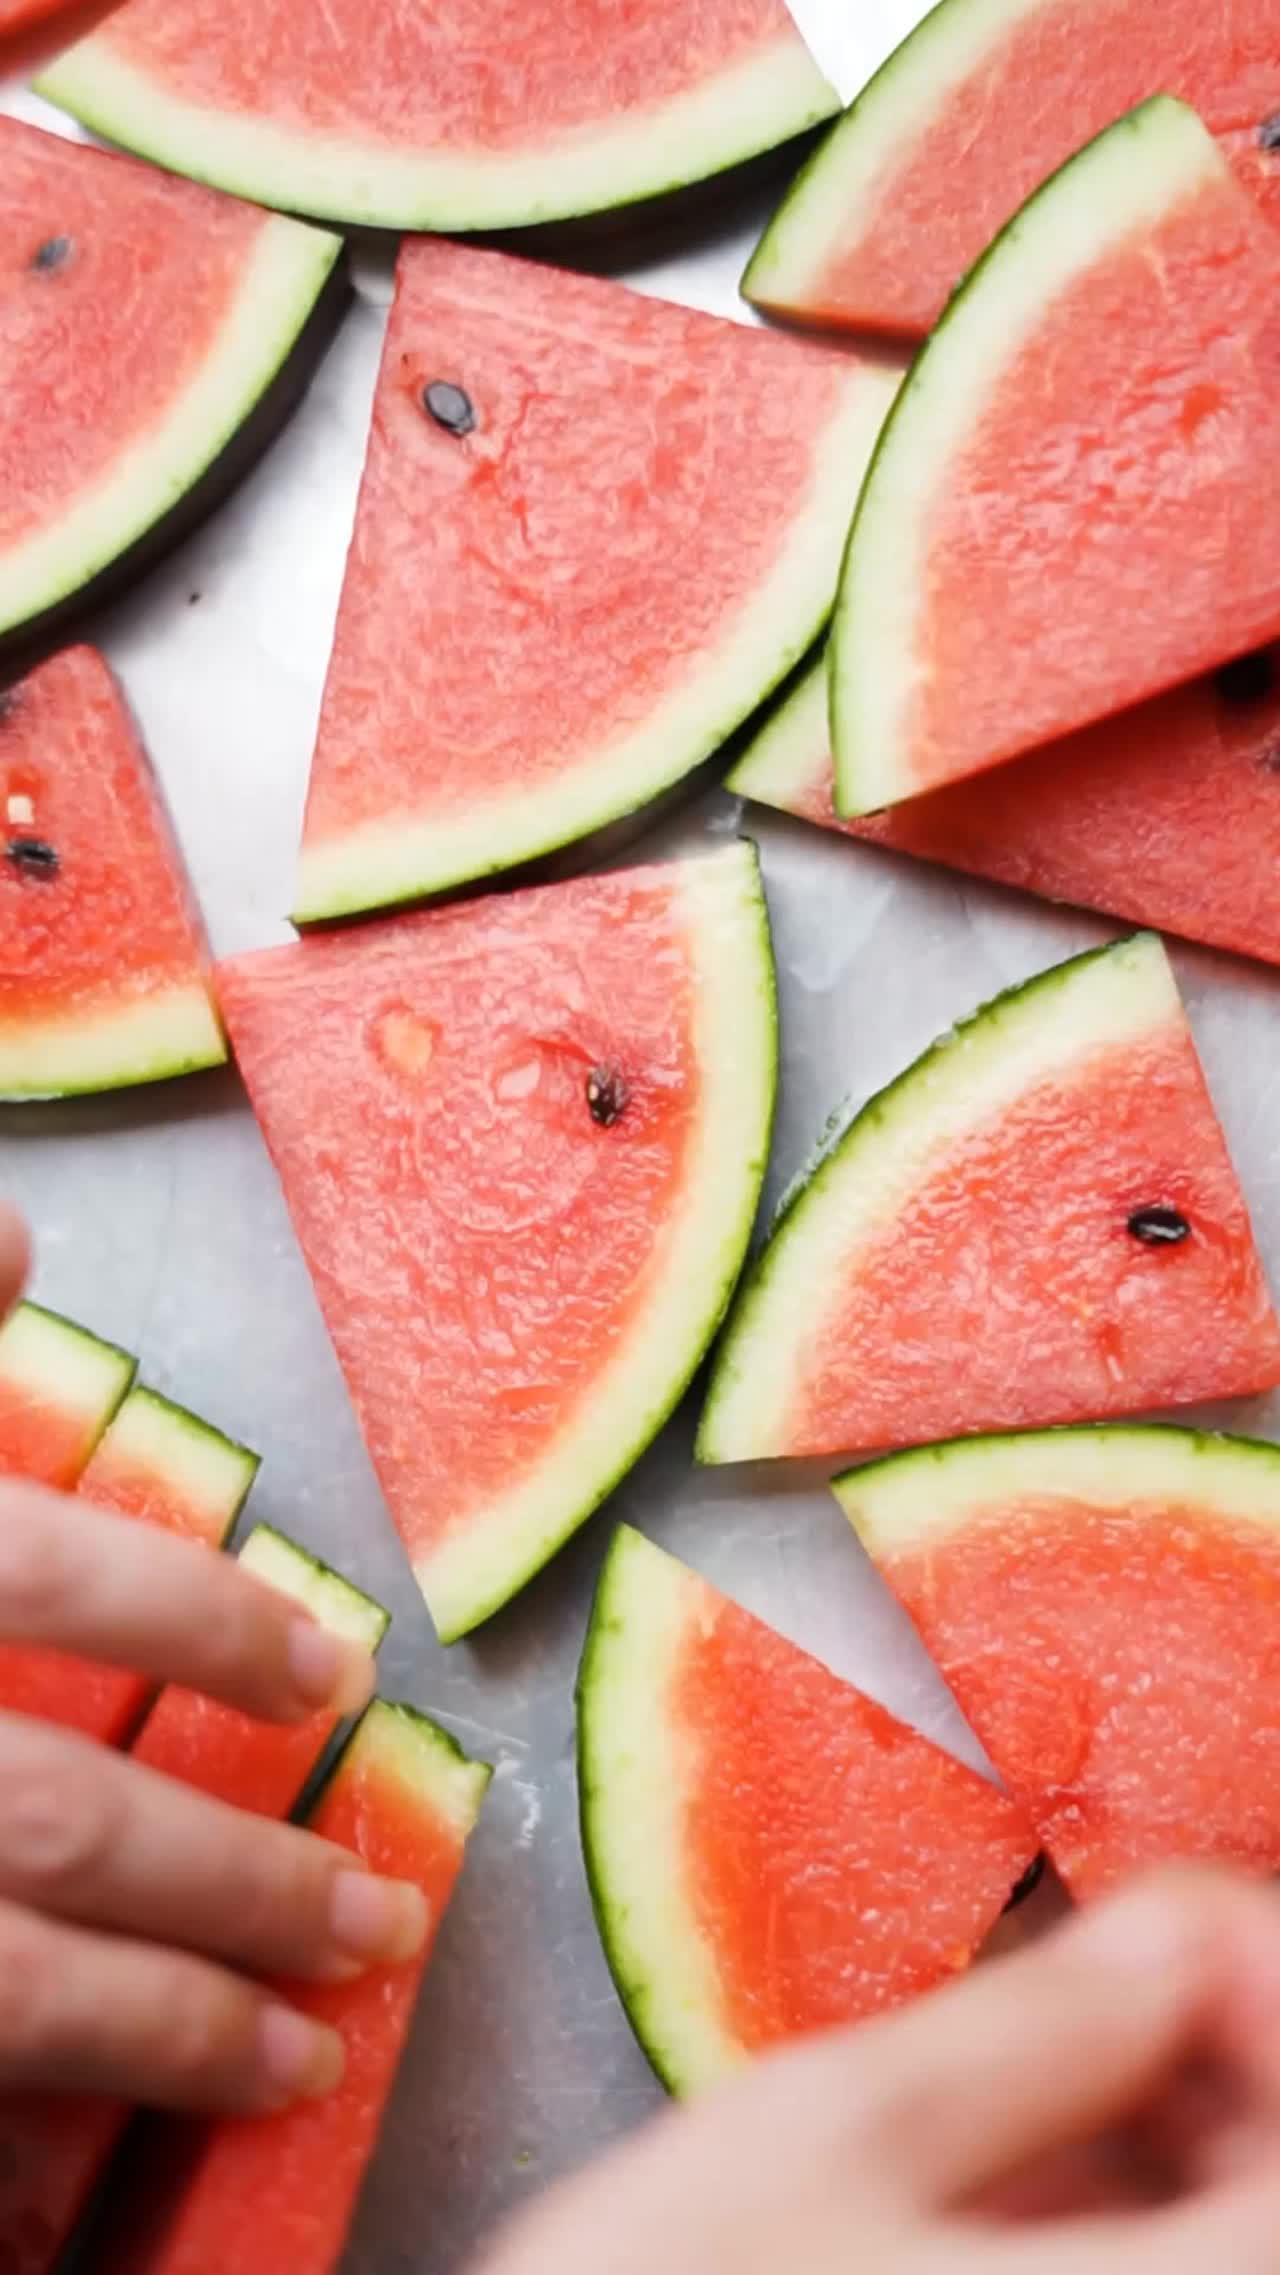 Watermelon Recipes: 15 Refreshing And Low Calorie Watermelon Recipes To Enjoy This Summer